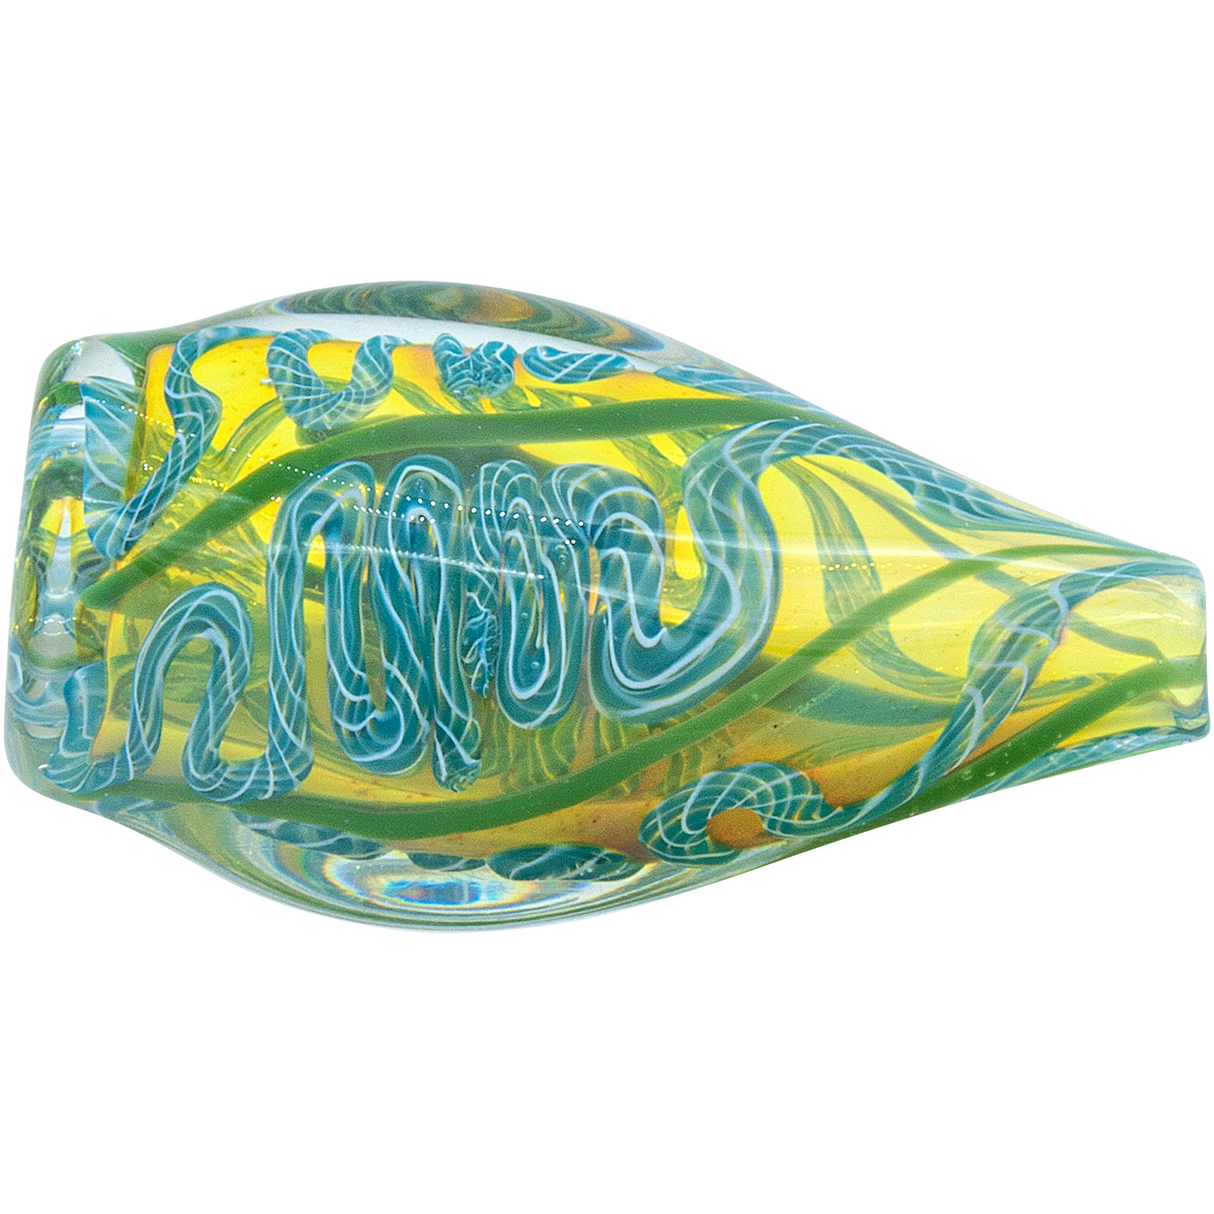 LA Pipes 'Skipping Stone' Inside-Out Chillum in Green Hues, Borosilicate Glass, 2.5 inch